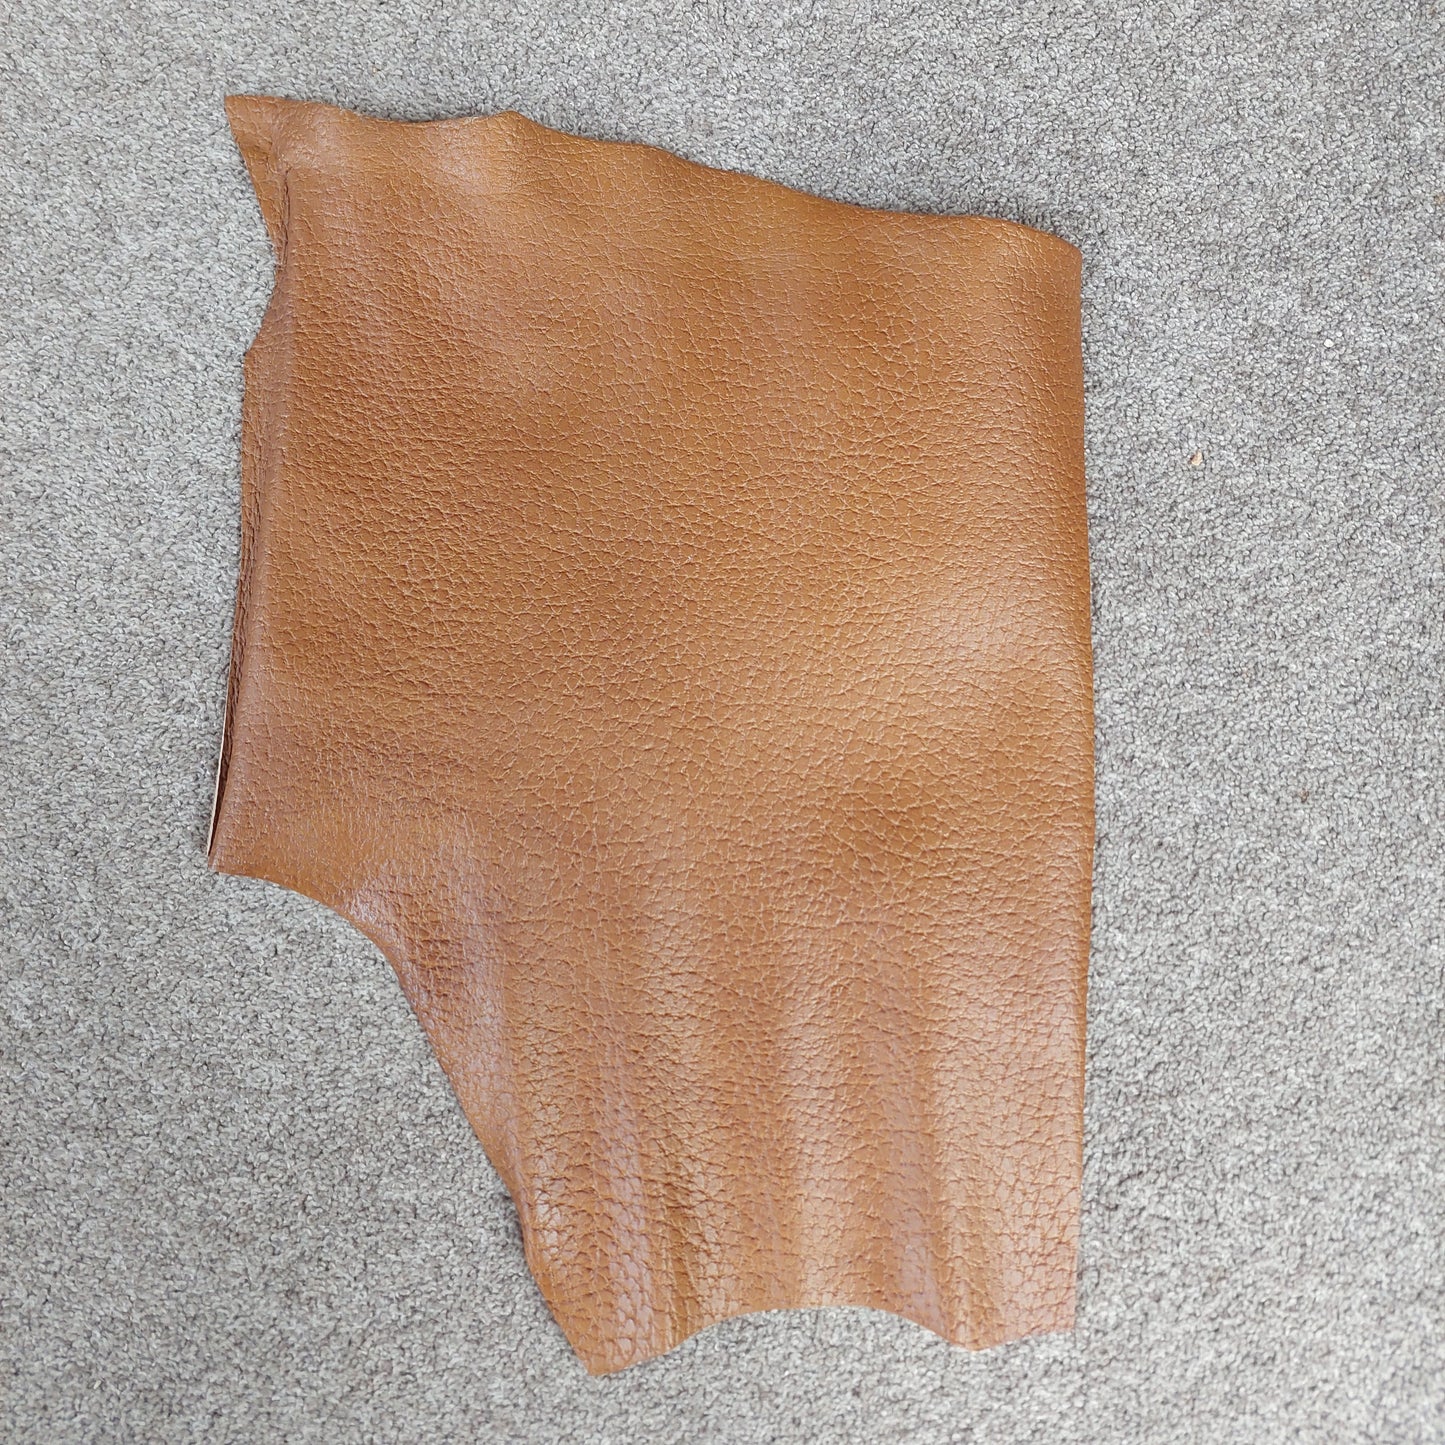 Textured Tan Leather Piece